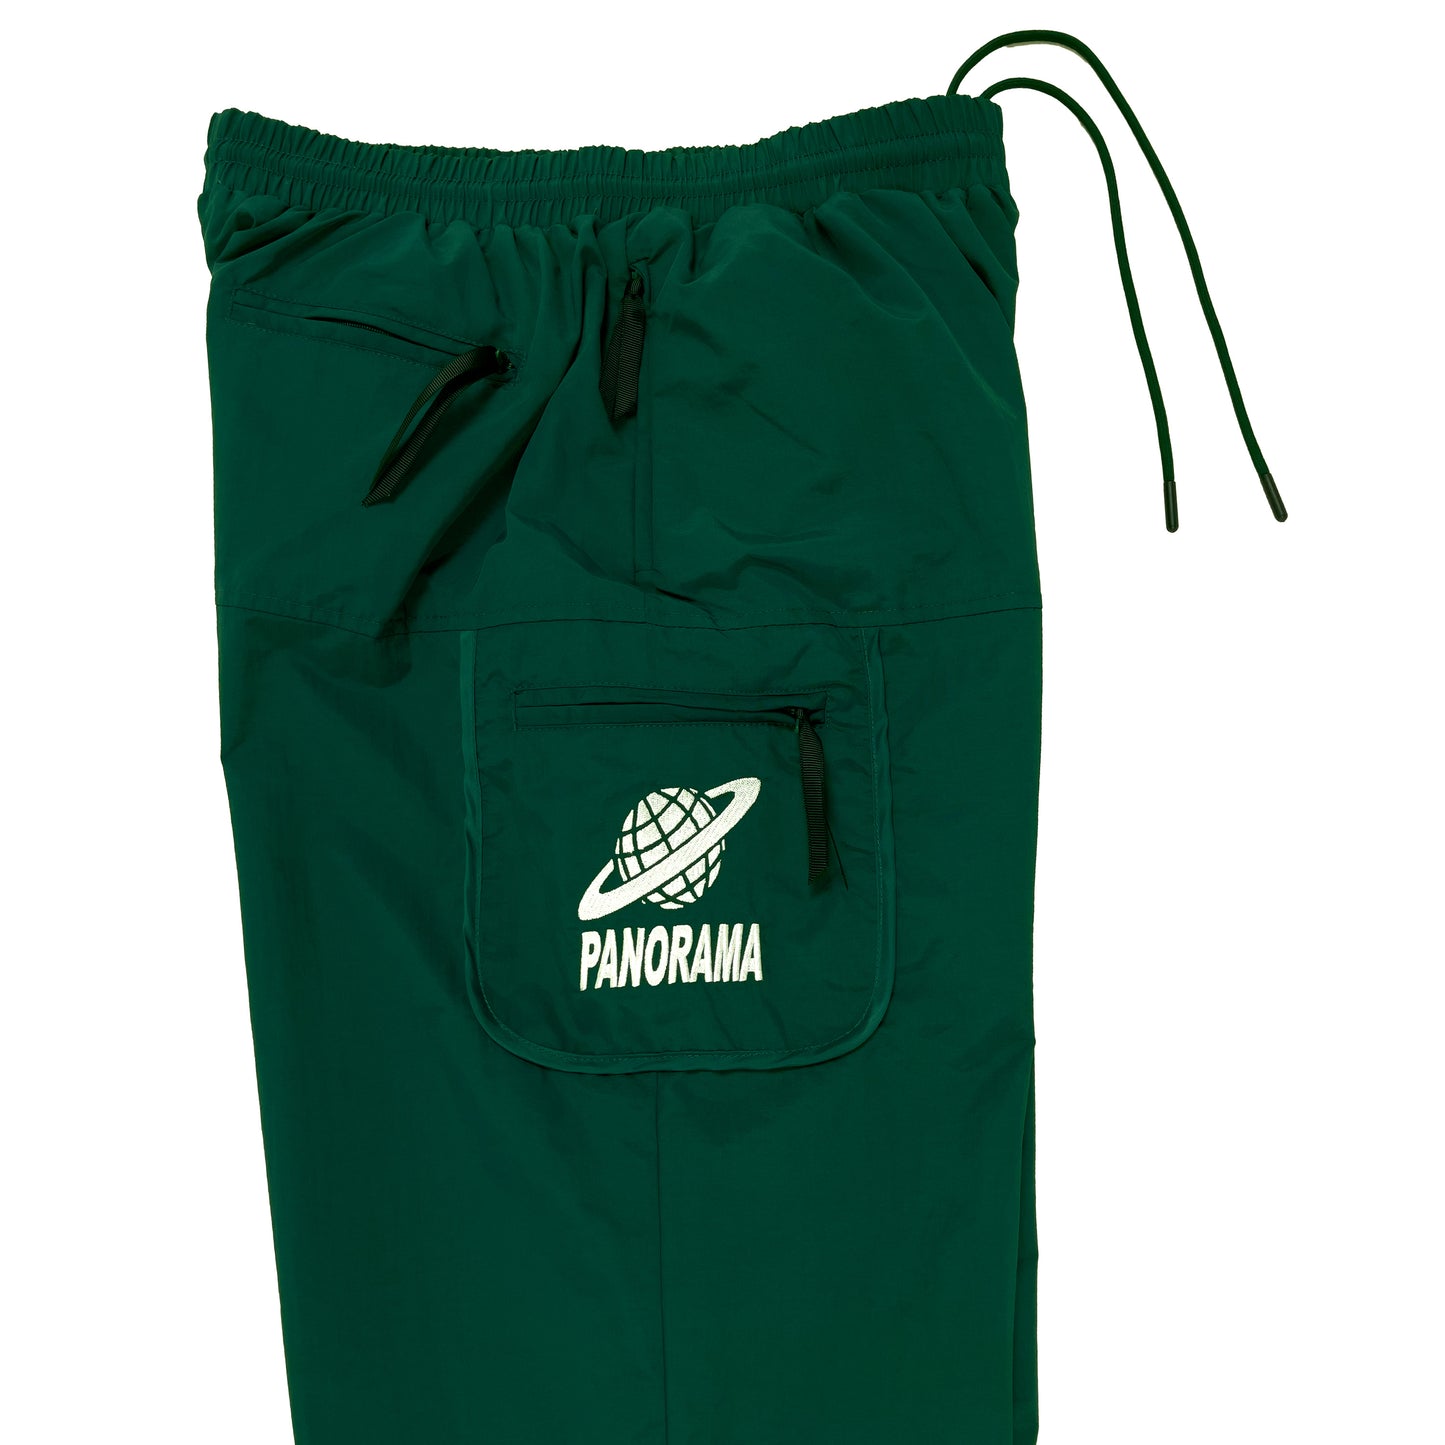 Green Lined Track Pants